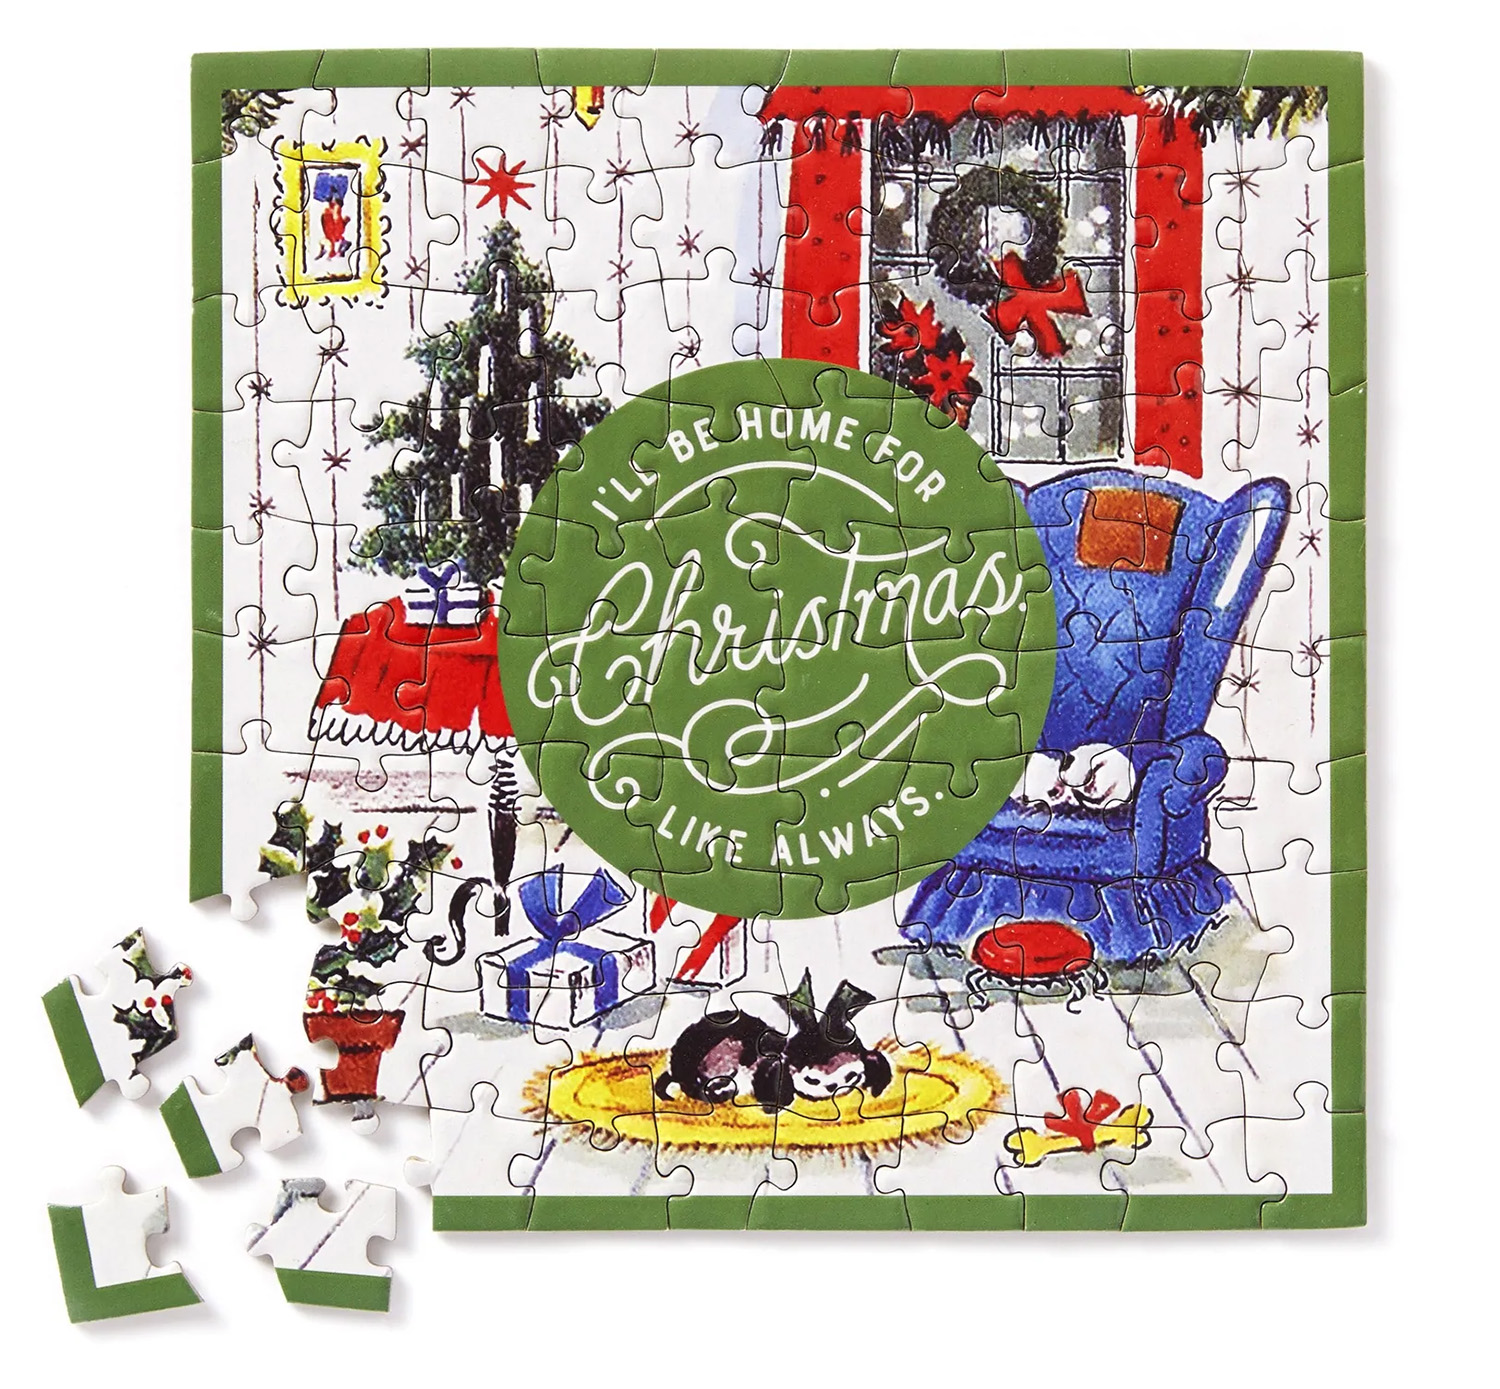 Home for Christmas Mini Shaped Puzzle Humor Jigsaw Puzzle